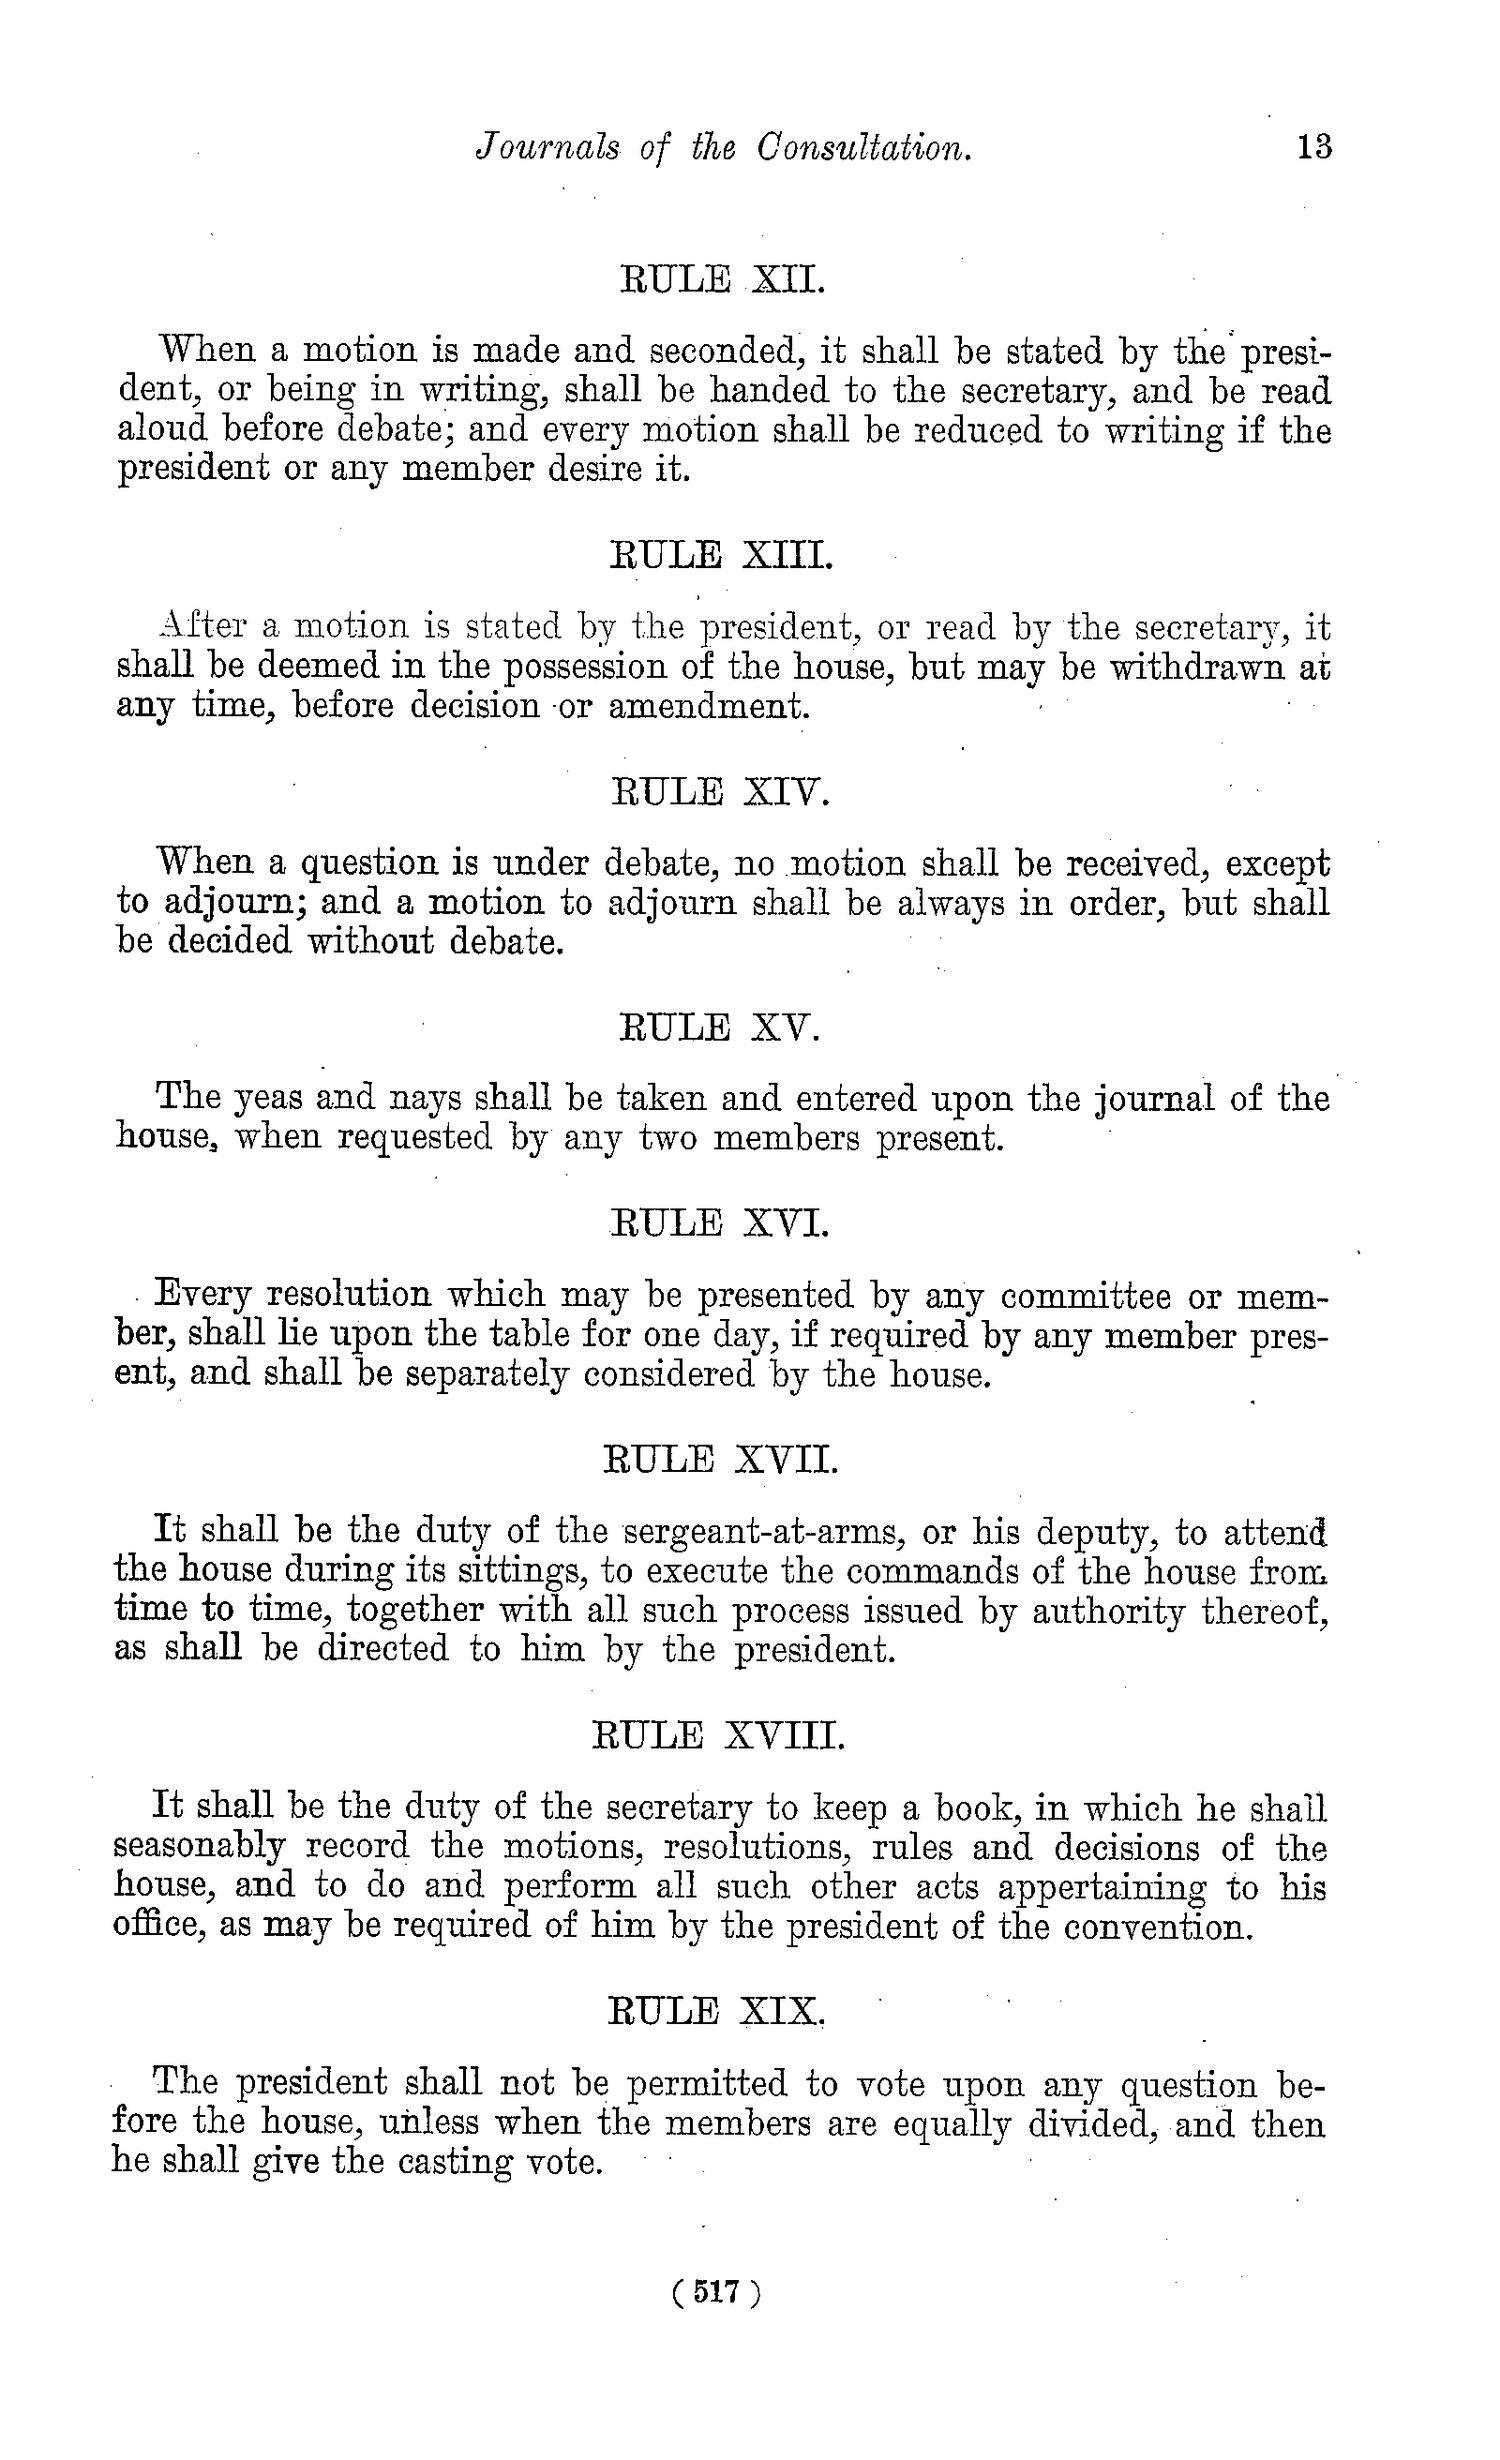 The Laws of Texas, 1822-1897 Volume 1
                                                
                                                    517
                                                